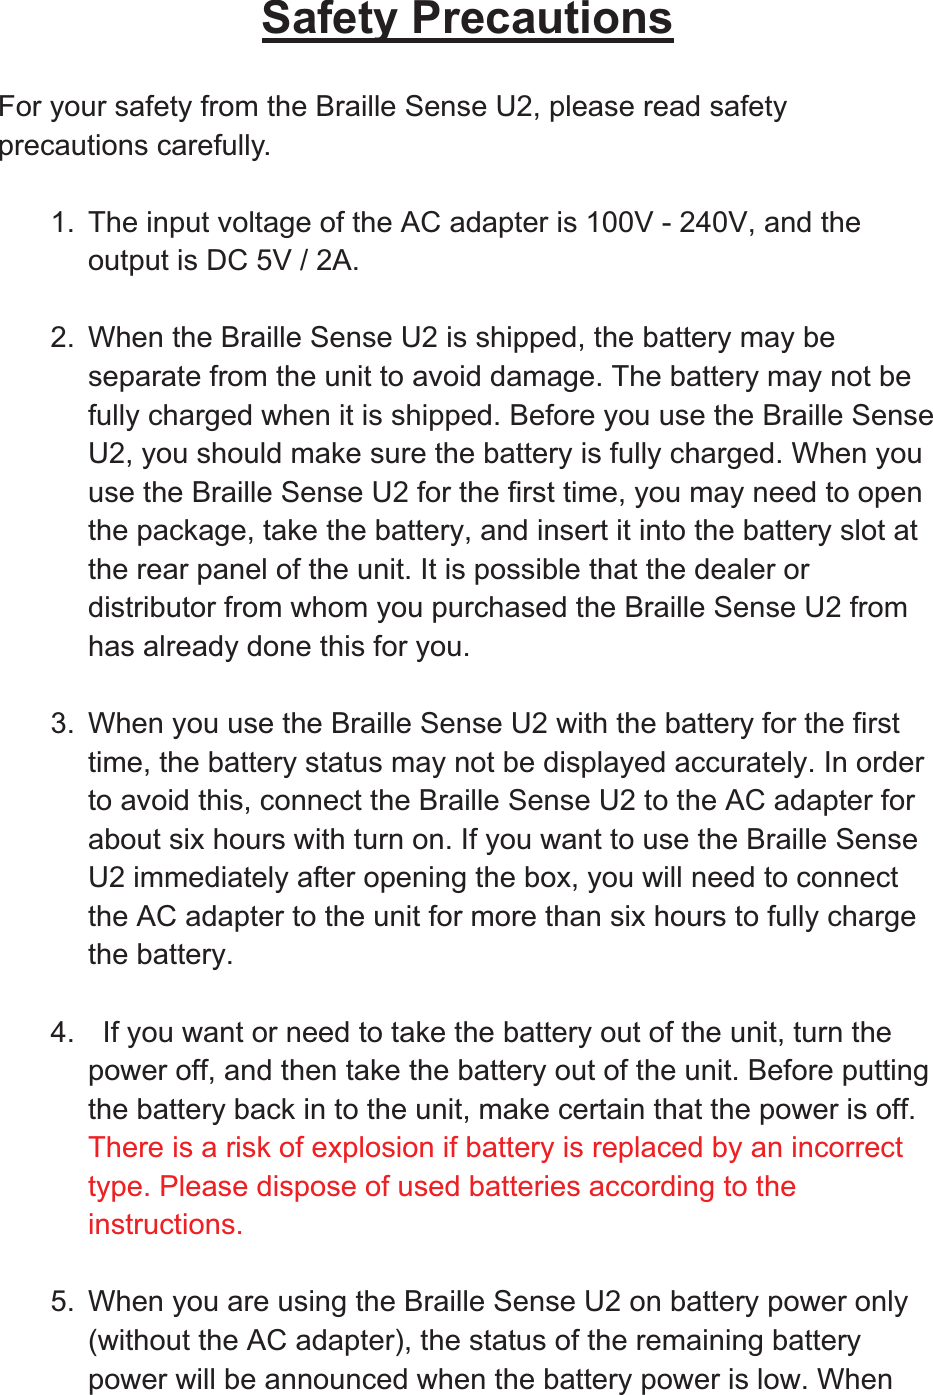 Safety PrecautionsFor your safety from the Braille Sense U2, please read safety precautions carefully. 1.  The input voltage of the AC adapter is 100V - 240V, and the output is DC 5V / 2A. 2.  When the Braille Sense U2 is shipped, the battery may be separate from the unit to avoid damage. The battery may not be fully charged when it is shipped. Before you use the Braille Sense U2, you should make sure the battery is fully charged. When you use the Braille Sense U2 for the first time, you may need to open the package, take the battery, and insert it into the battery slot at the rear panel of the unit. It is possible that the dealer or distributor from whom you purchased the Braille Sense U2 from has already done this for you. 3.  When you use the Braille Sense U2 with the battery for the first time, the battery status may not be displayed accurately. In order to avoid this, connect the Braille Sense U2 to the AC adapter for about six hours with turn on. If you want to use the Braille Sense U2 immediately after opening the box, you will need to connect the AC adapter to the unit for more than six hours to fully charge the battery. 4.    If you want or need to take the battery out of the unit, turn the power off, and then take the battery out of the unit. Before putting the battery back in to the unit, make certain that the power is off. There is a risk of explosion if battery is replaced by an incorrect type. Please dispose of used batteries according to the instructions.5.  When you are using the Braille Sense U2 on battery power only (without the AC adapter), the status of the remaining battery power will be announced when the battery power is low. When 